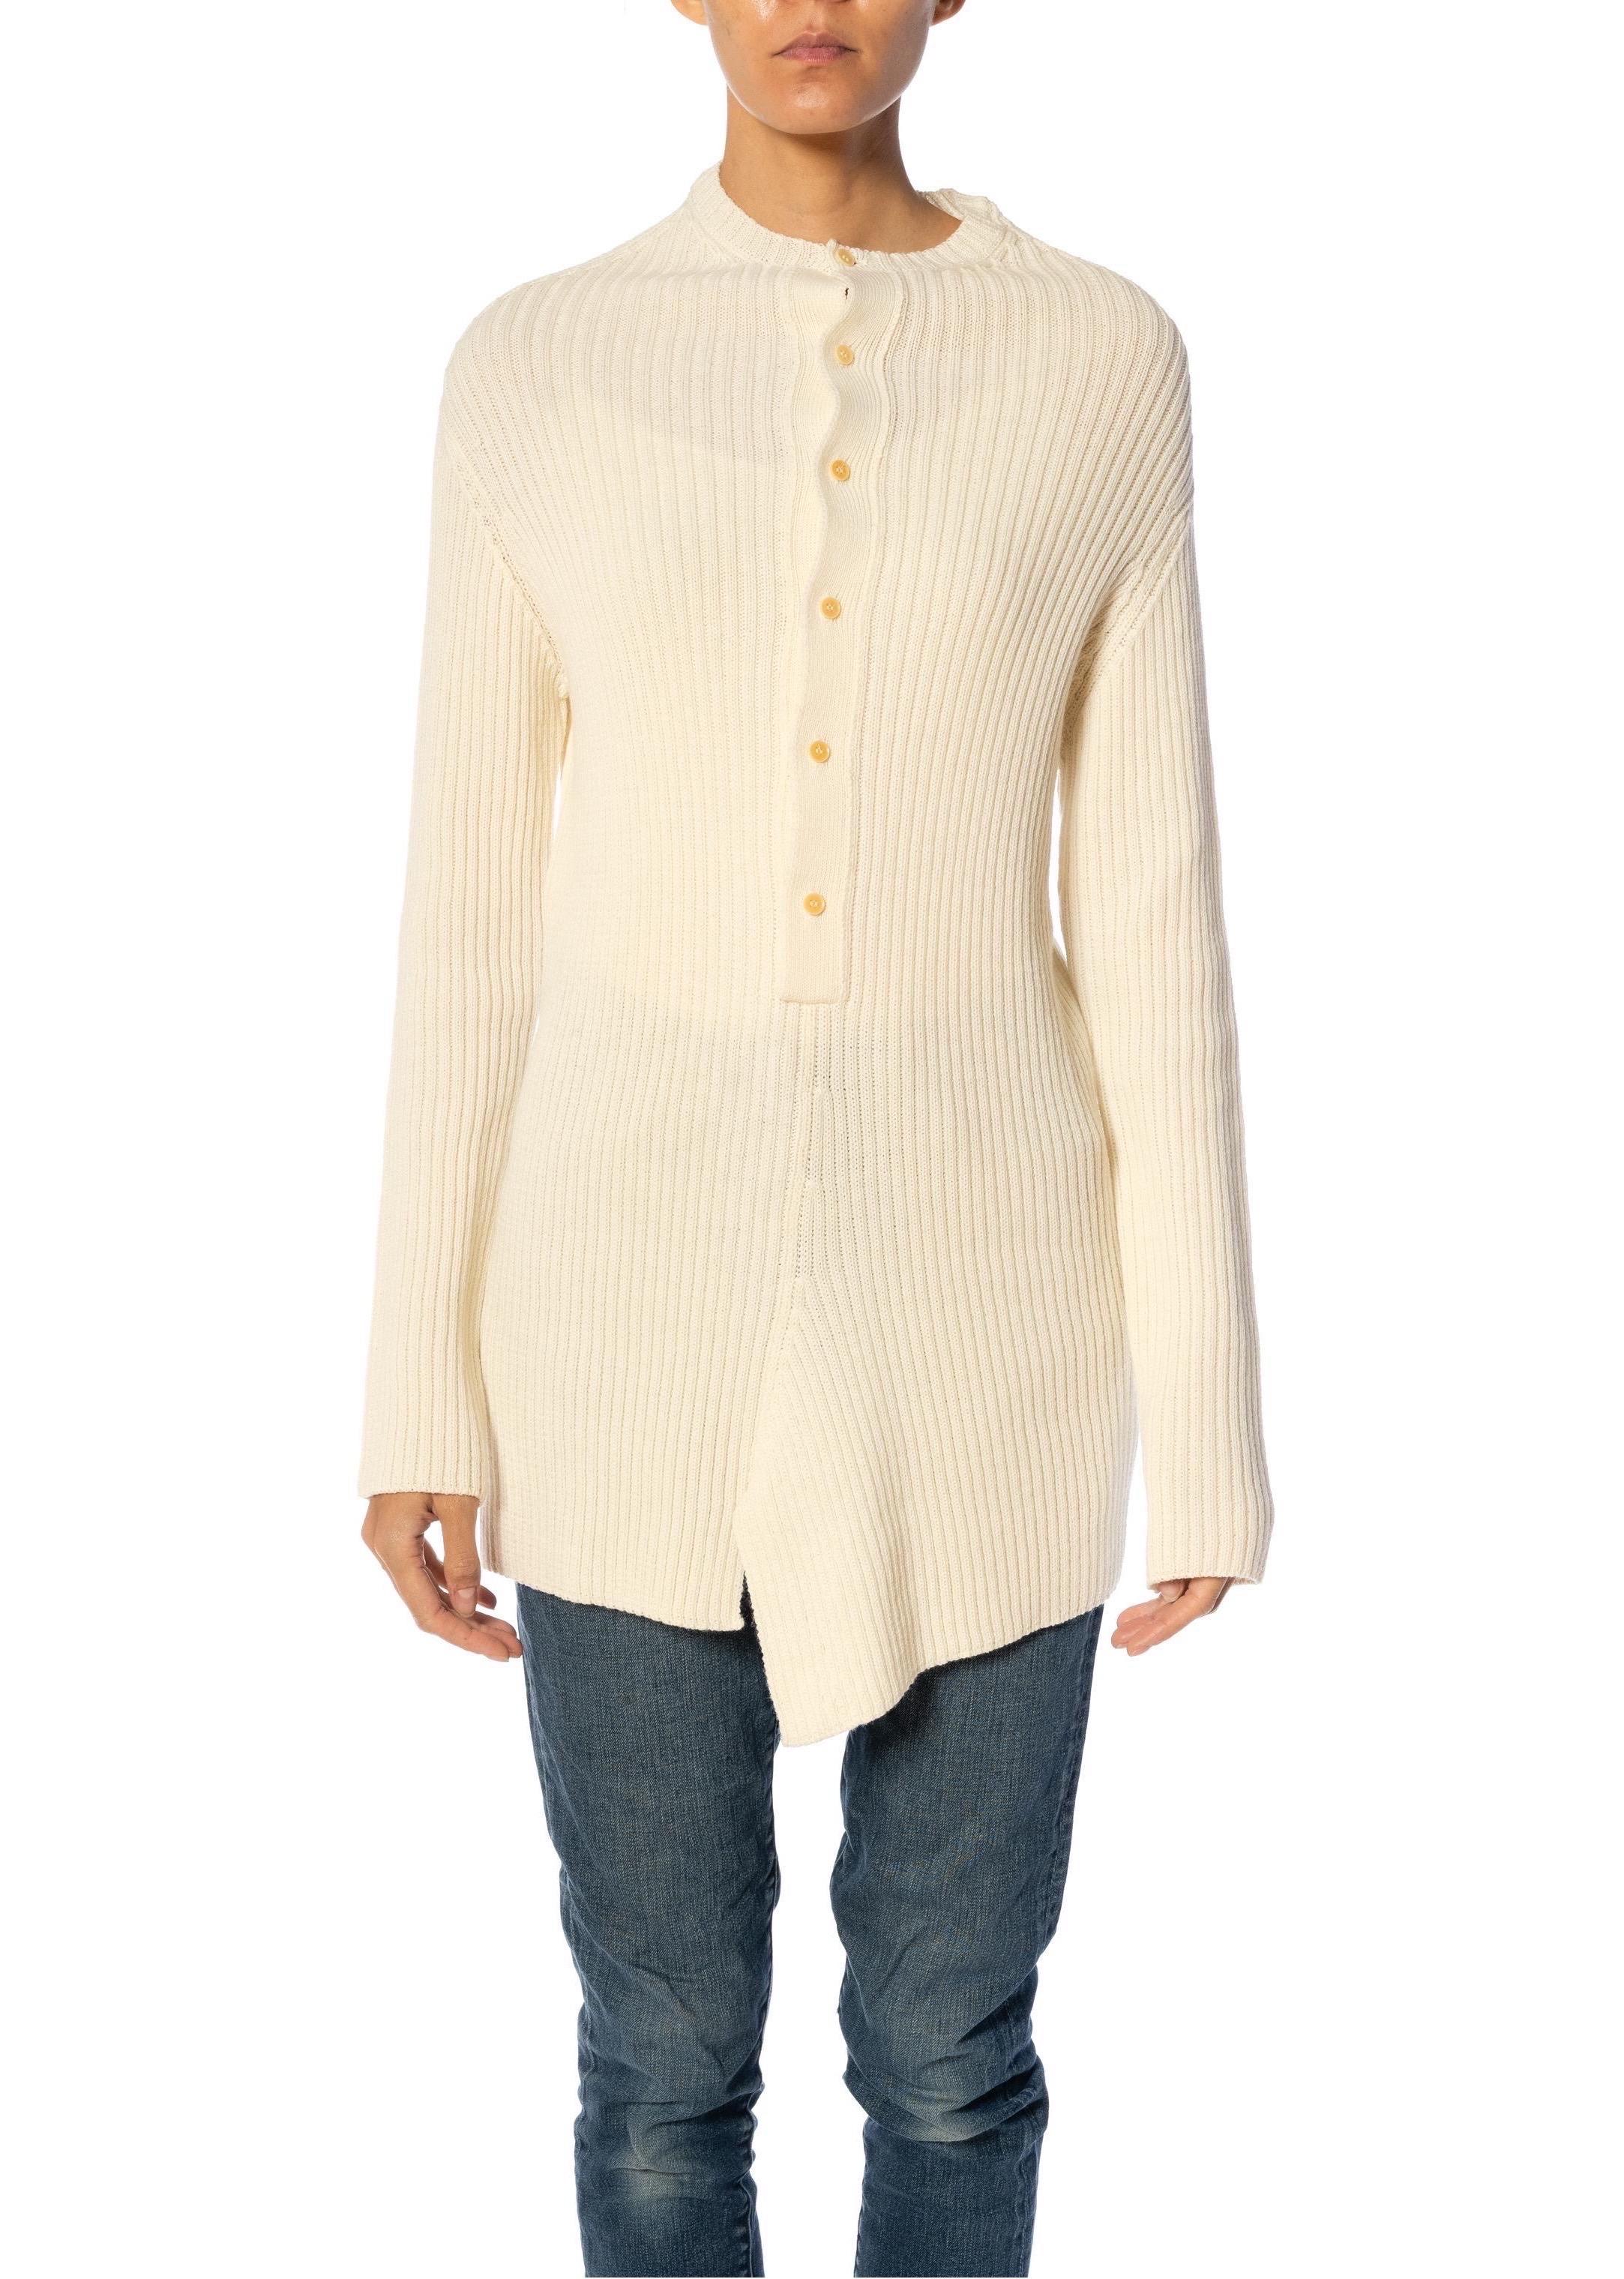 1990S YOHJI YAMAMOTO Cream Wool Knit Button Down Sweater In Excellent Condition For Sale In New York, NY